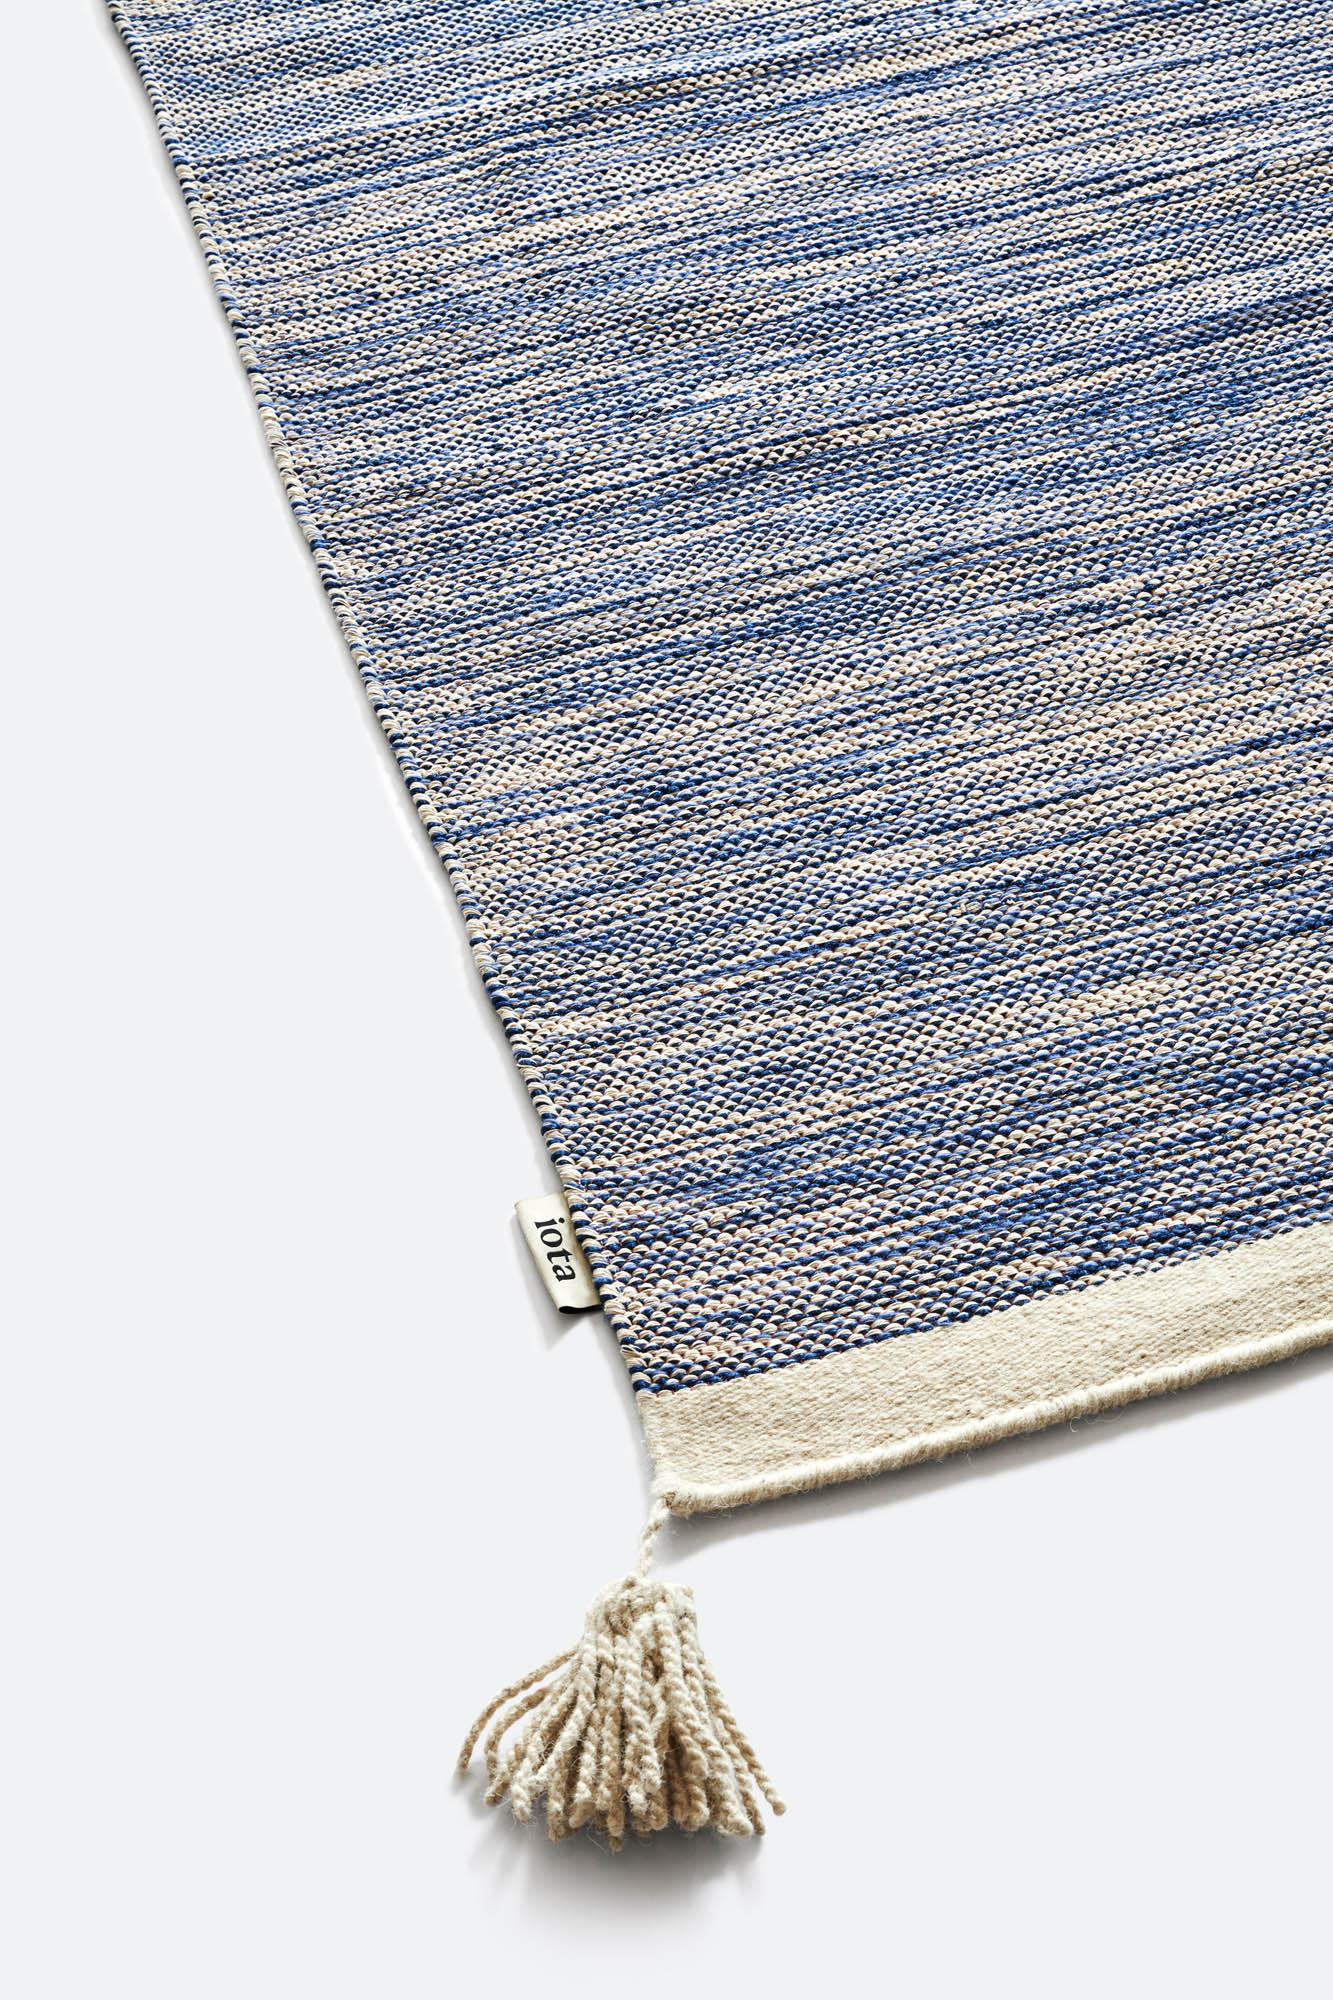 Hand-Crafted 'Rivers' Handmade Woven Indoor Rug in Blue Sand by Iota For Sale